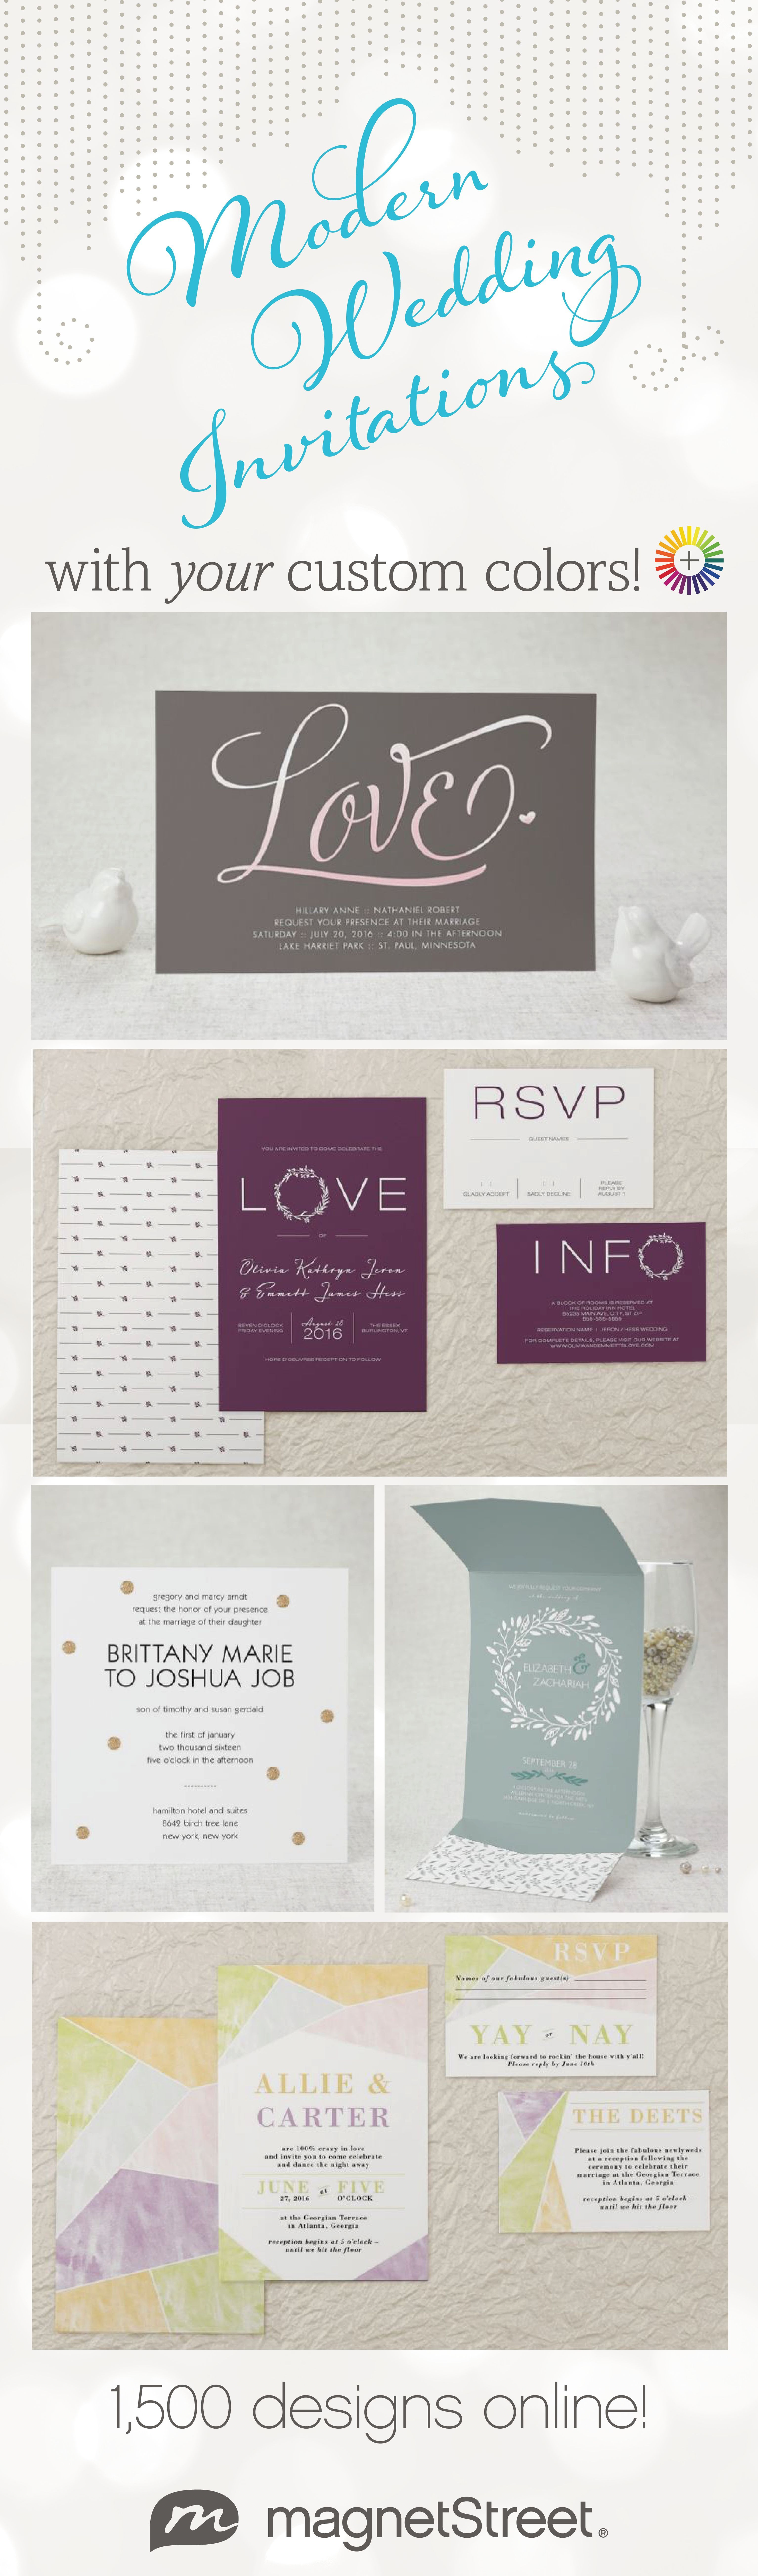 Lots of new Wedding Invitations designs to choose from! Plus you can customize style, paper, and color to your style!